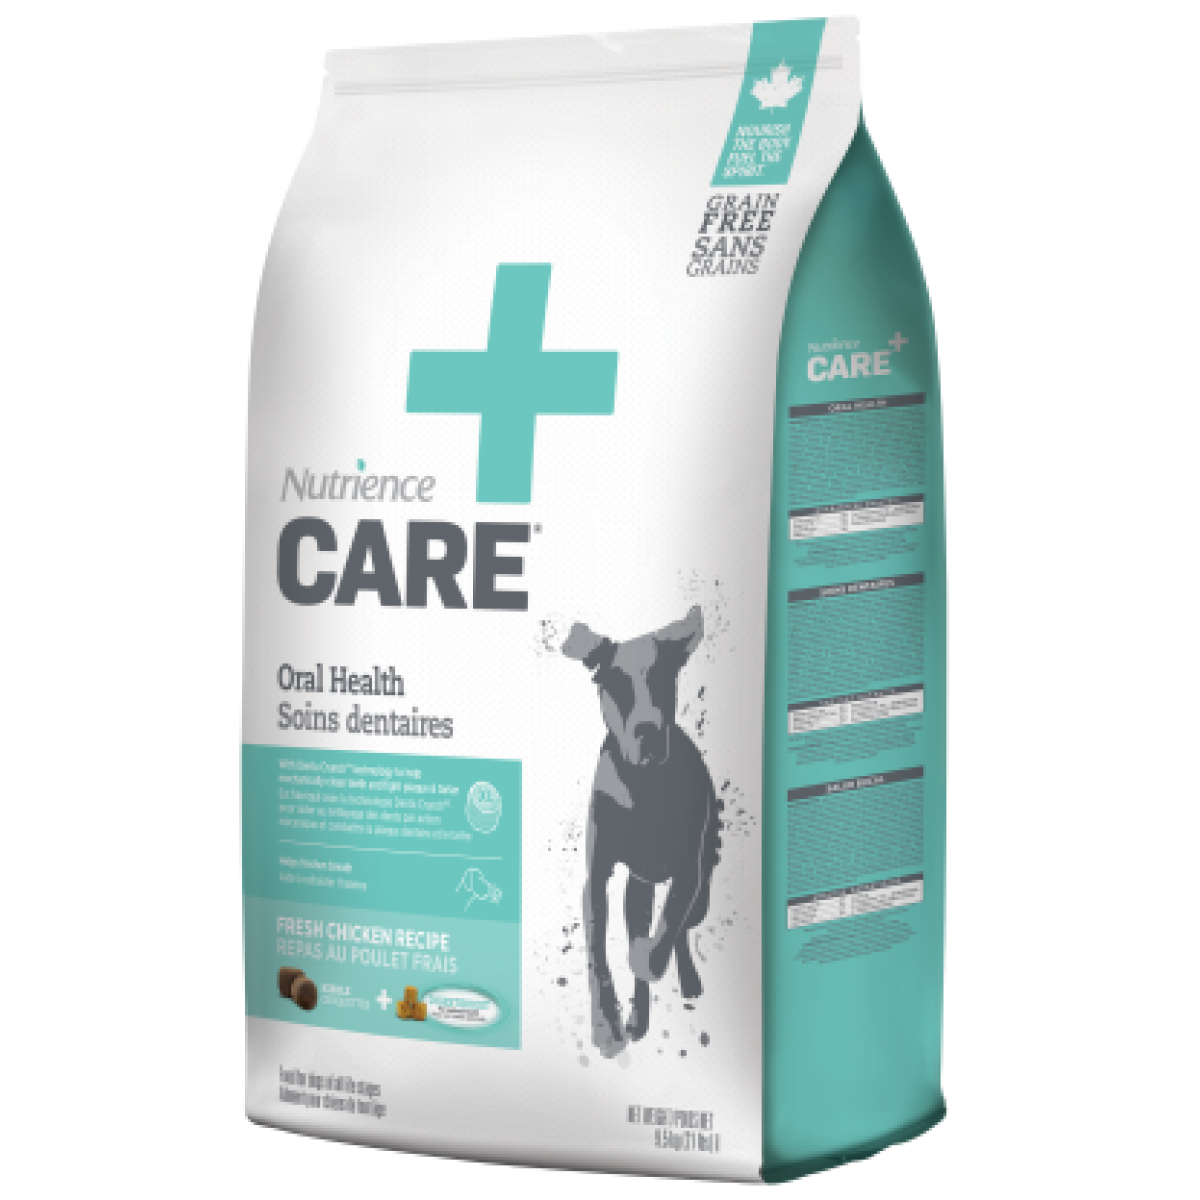 Nutrience Care - Oral Health Dry food For Dog 3.3lb